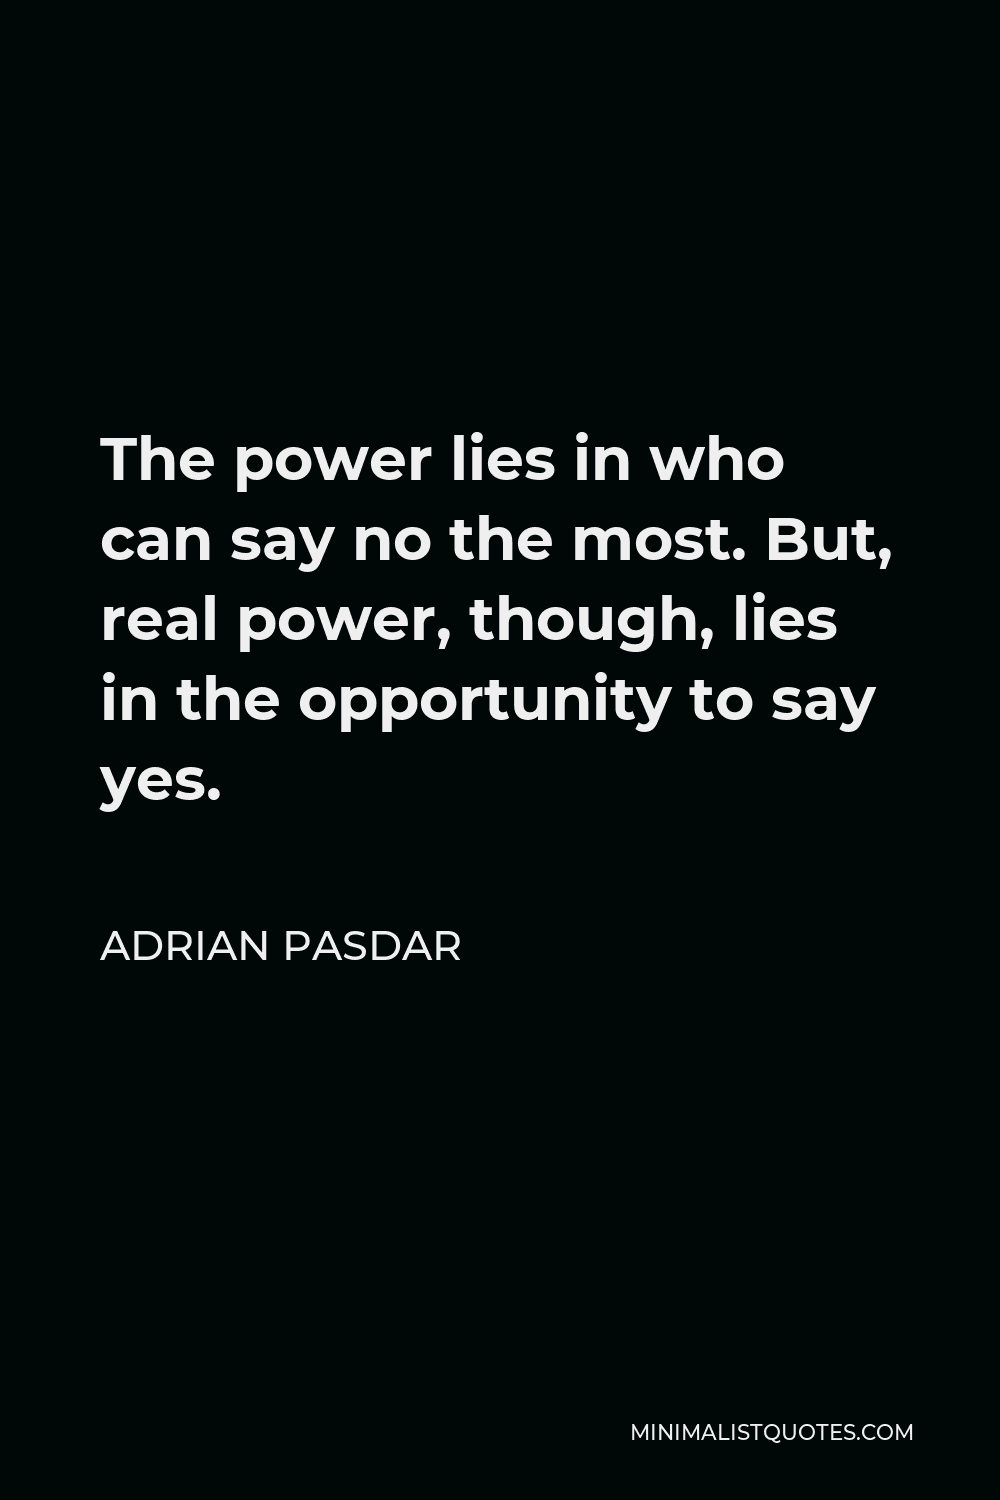 Adrian Pasdar Quote - The power lies in who can say no the most. But, real power, though, lies in the opportunity to say yes.